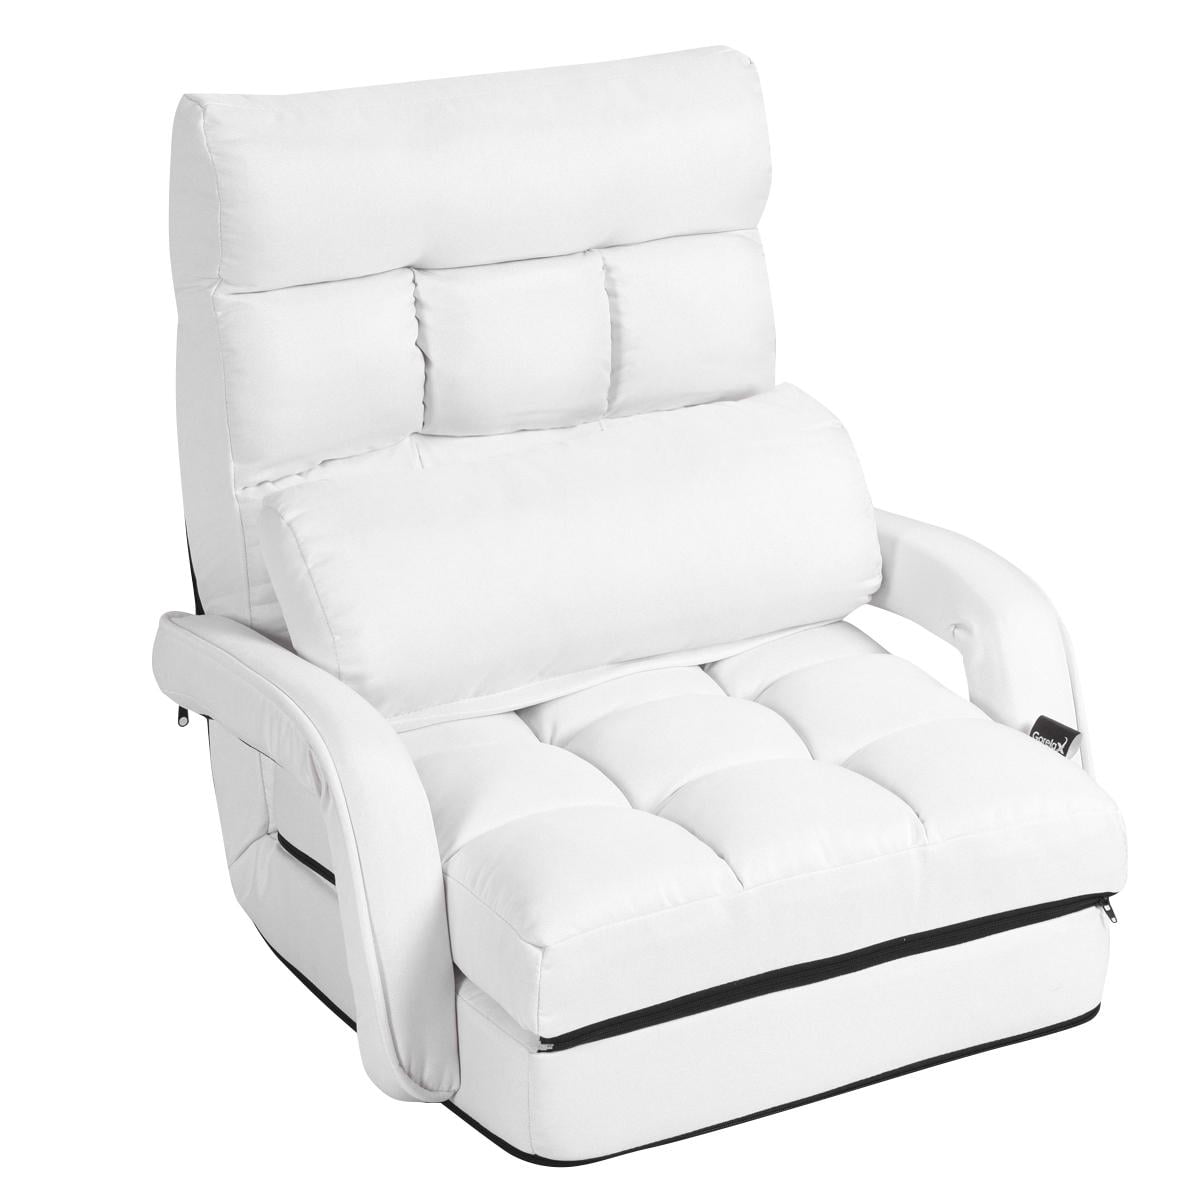  NOLITOY Inflatable Couch Recliner Sofa Cama para Modernos Baratos  Sofas Couches Inflatable Folding Couch Inflatable Chair Sofa Foldable Stool  Lazy Couch Lounge Chair with Backrest PVC : Home & Kitchen